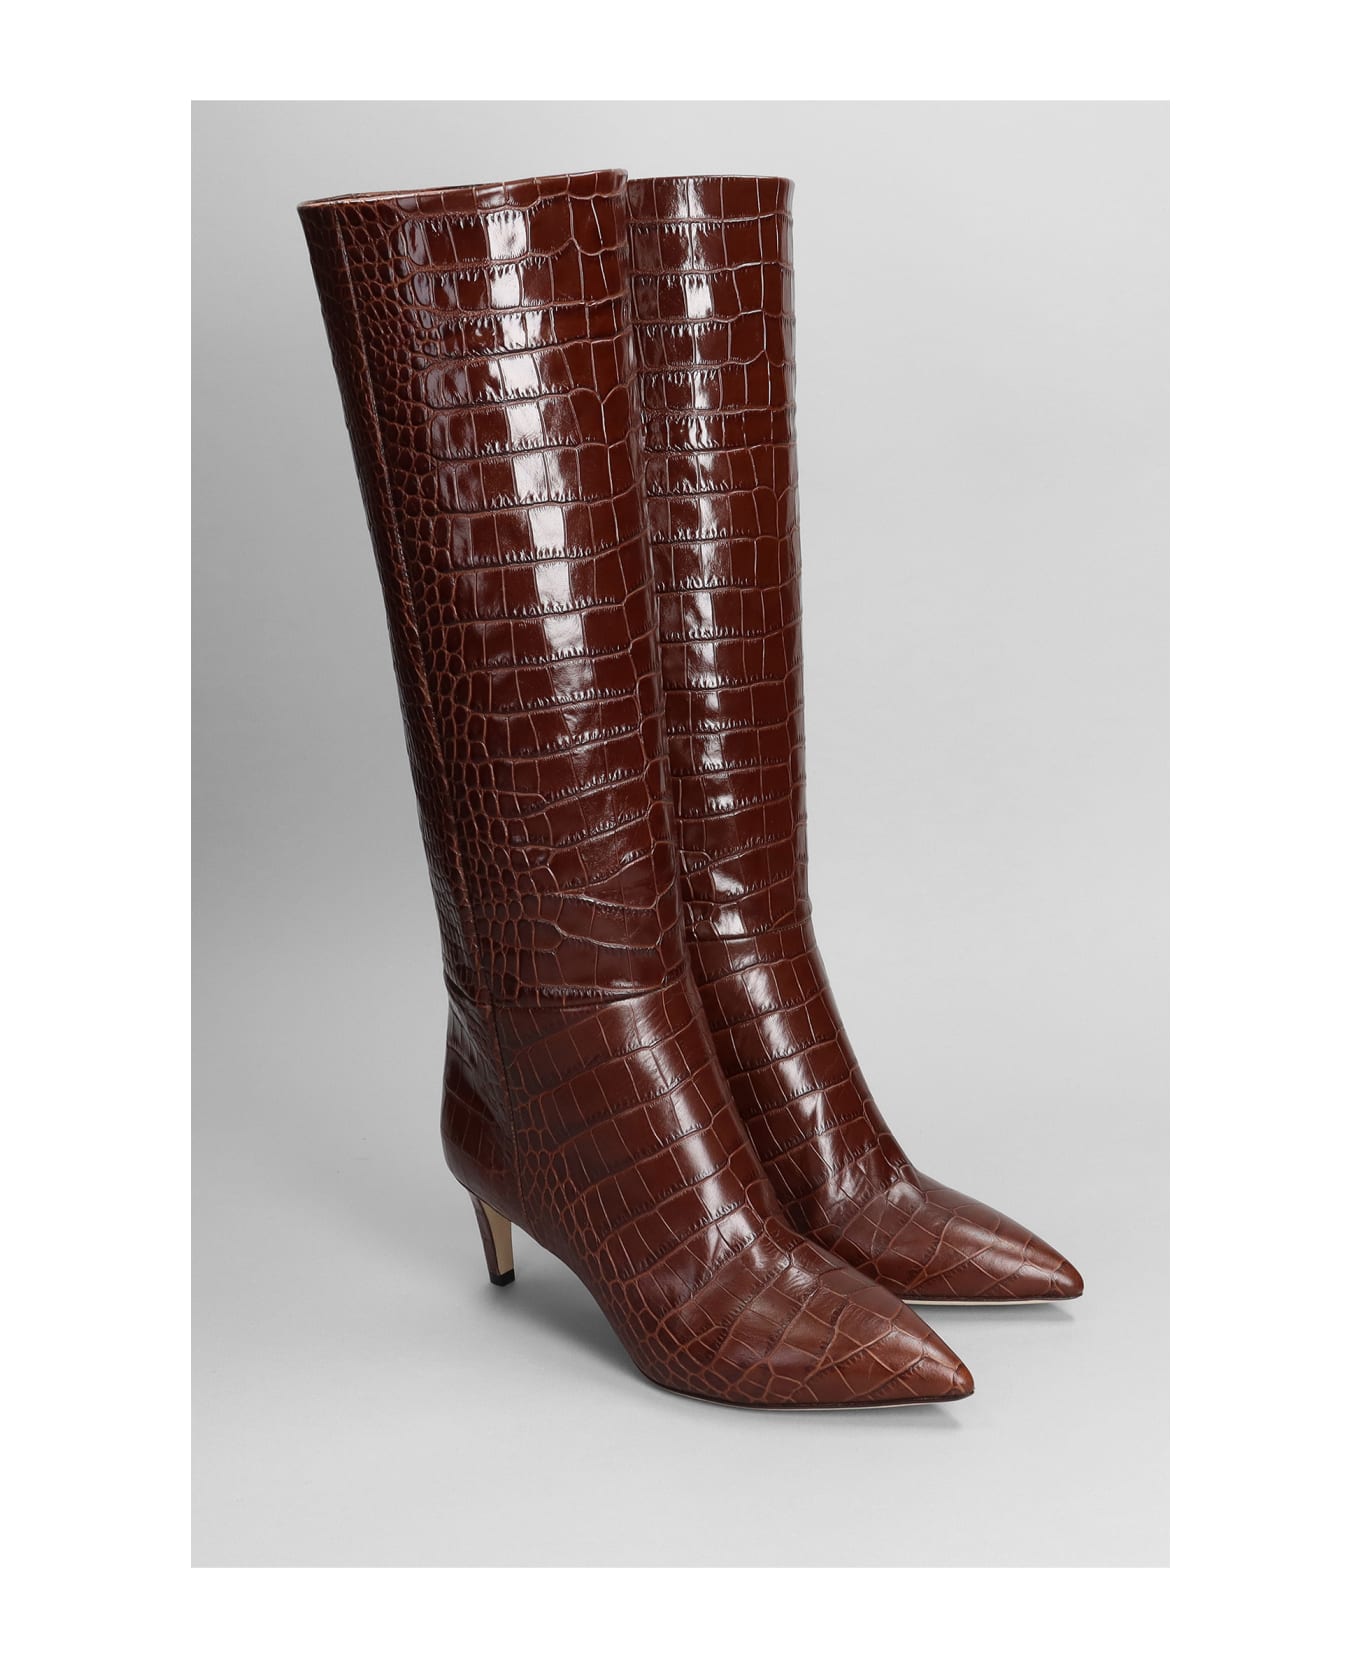 Paris Texas High Heels Boots In Brown Leather - brown